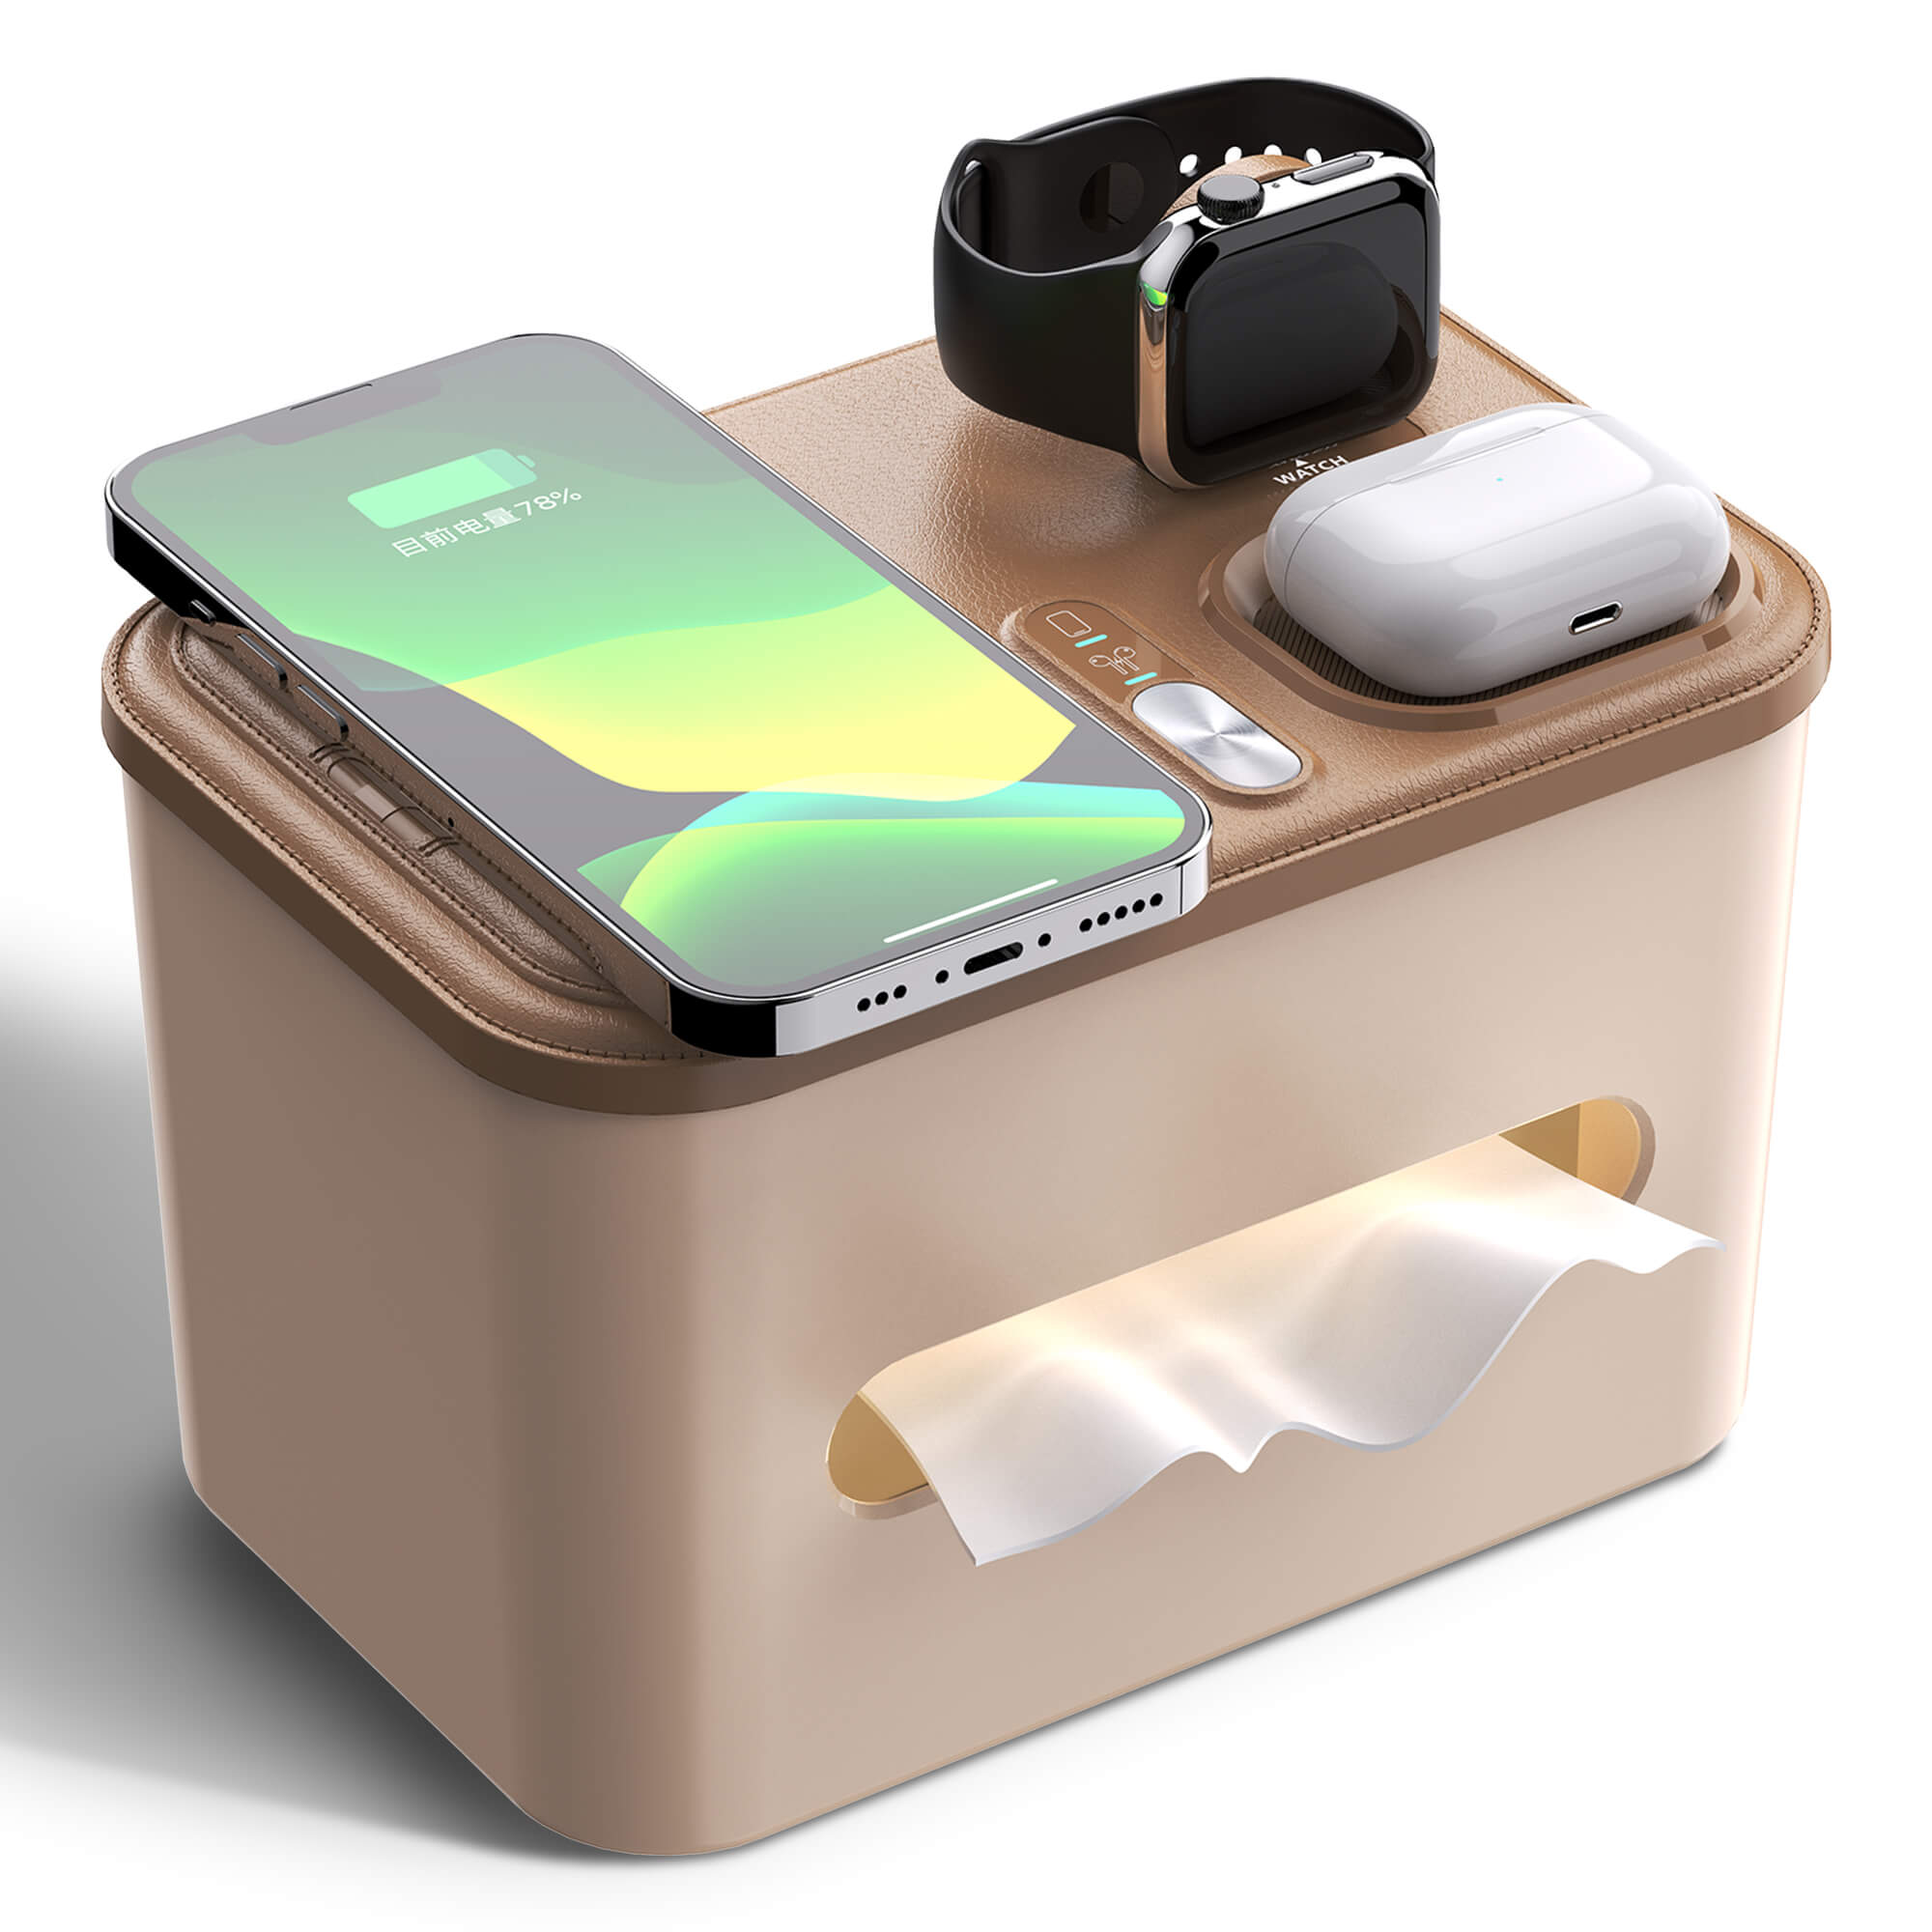 Capon Multifunction Tissue Holder with 3 in 1 Fast Charging Station-Q1 Wireless Charging, Compatible Phone, Watch & AirPods, Rectangular Tissue Box Cover with Night Light for Home Office Decor